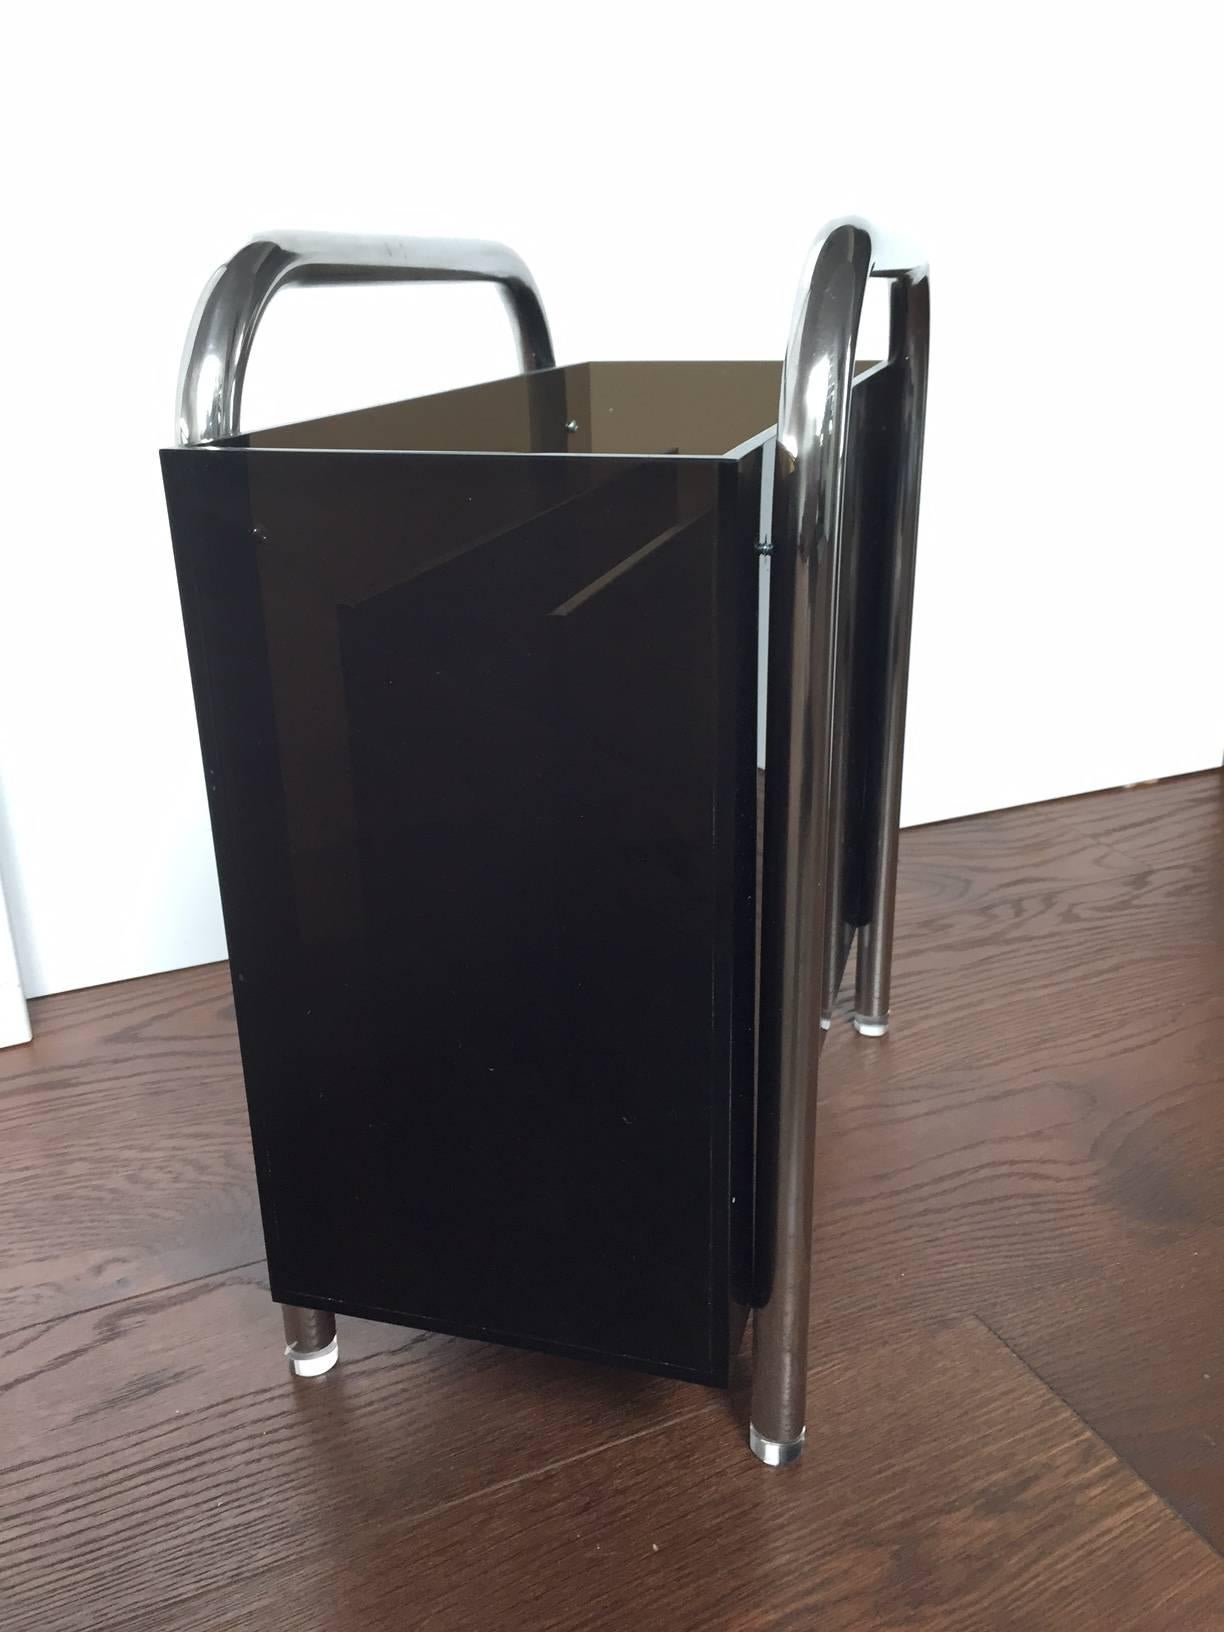 Beautiful and rare magazine holder designed and manufactured by Charles Hollis Jones in the 1970s.

The piece is executed in bronzed Lucite having a solid stainless steel frame having three compartments to store books or magazines.

The piece is